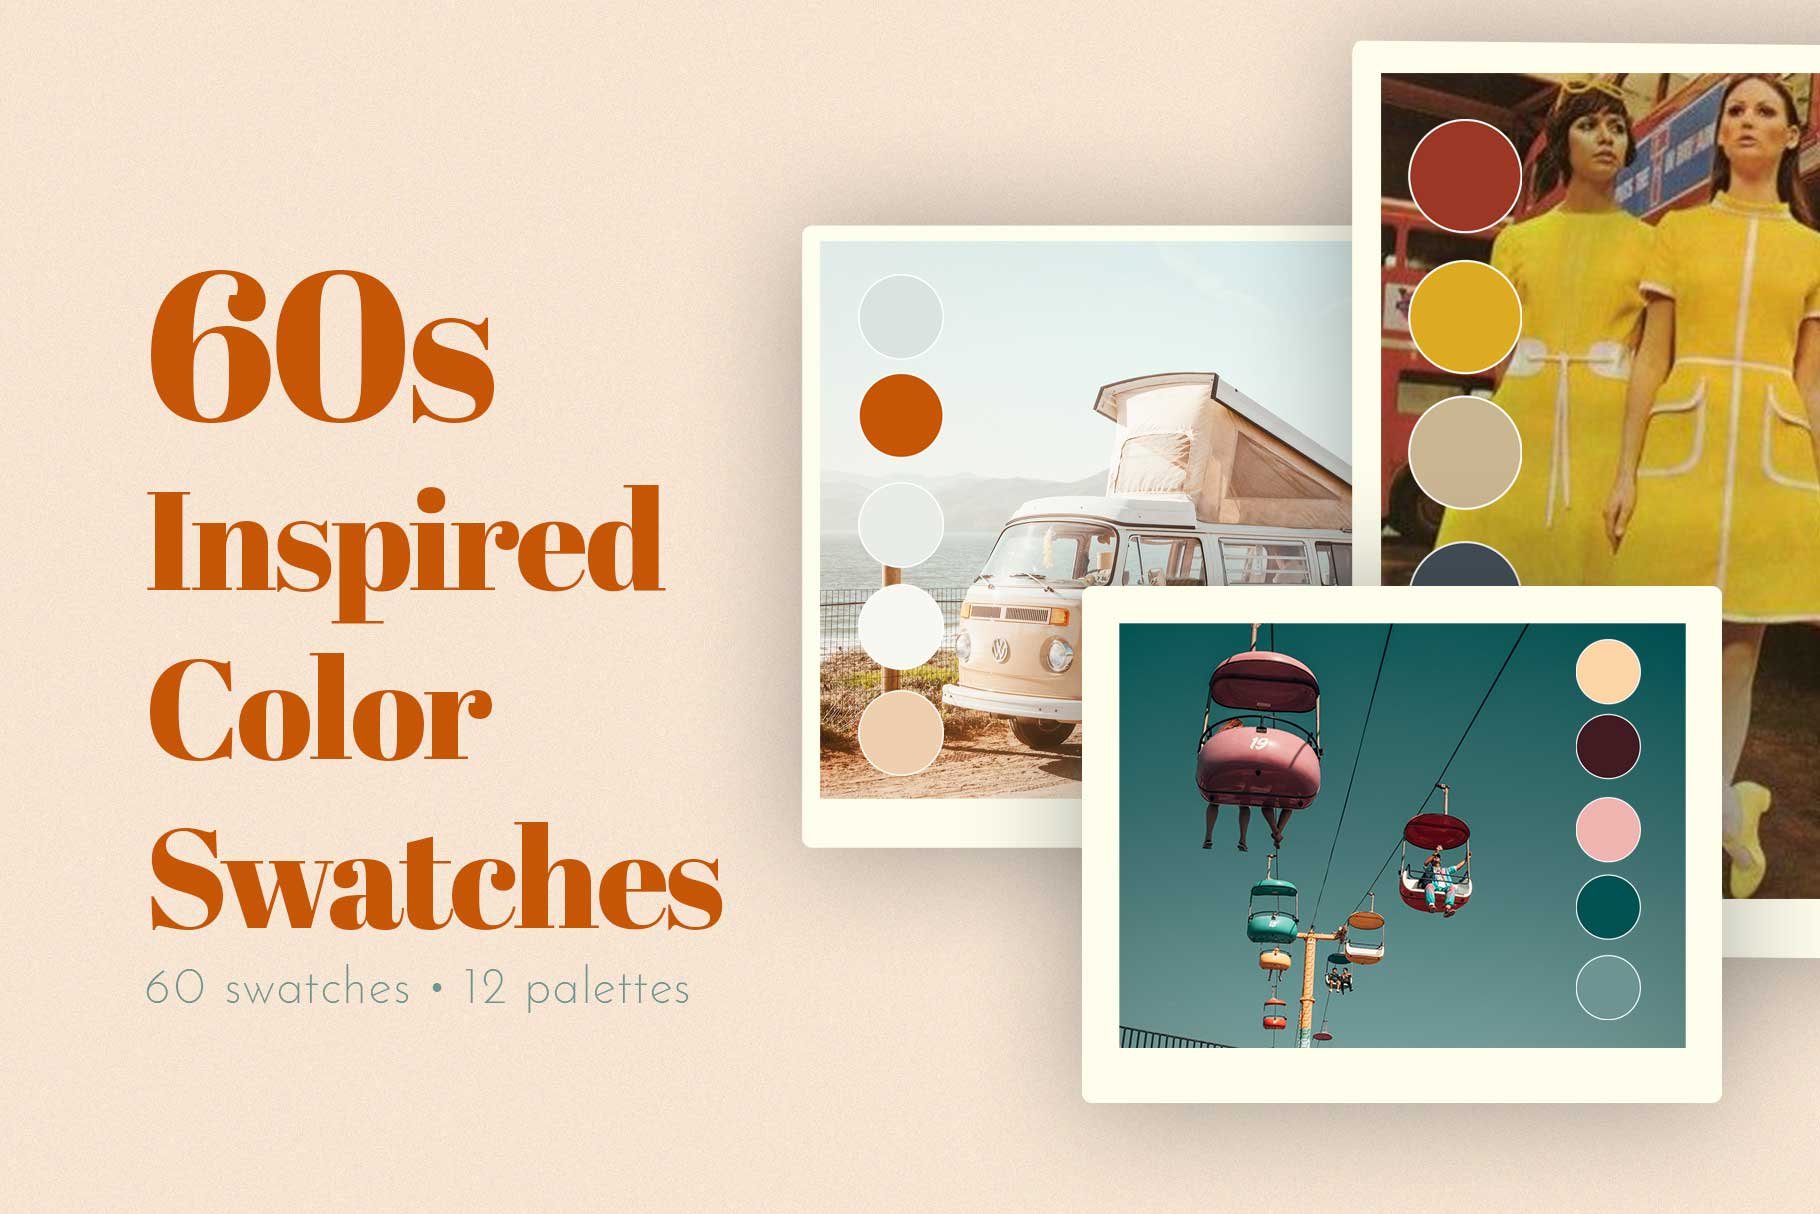 60s Inspired Color Swatchescover image.